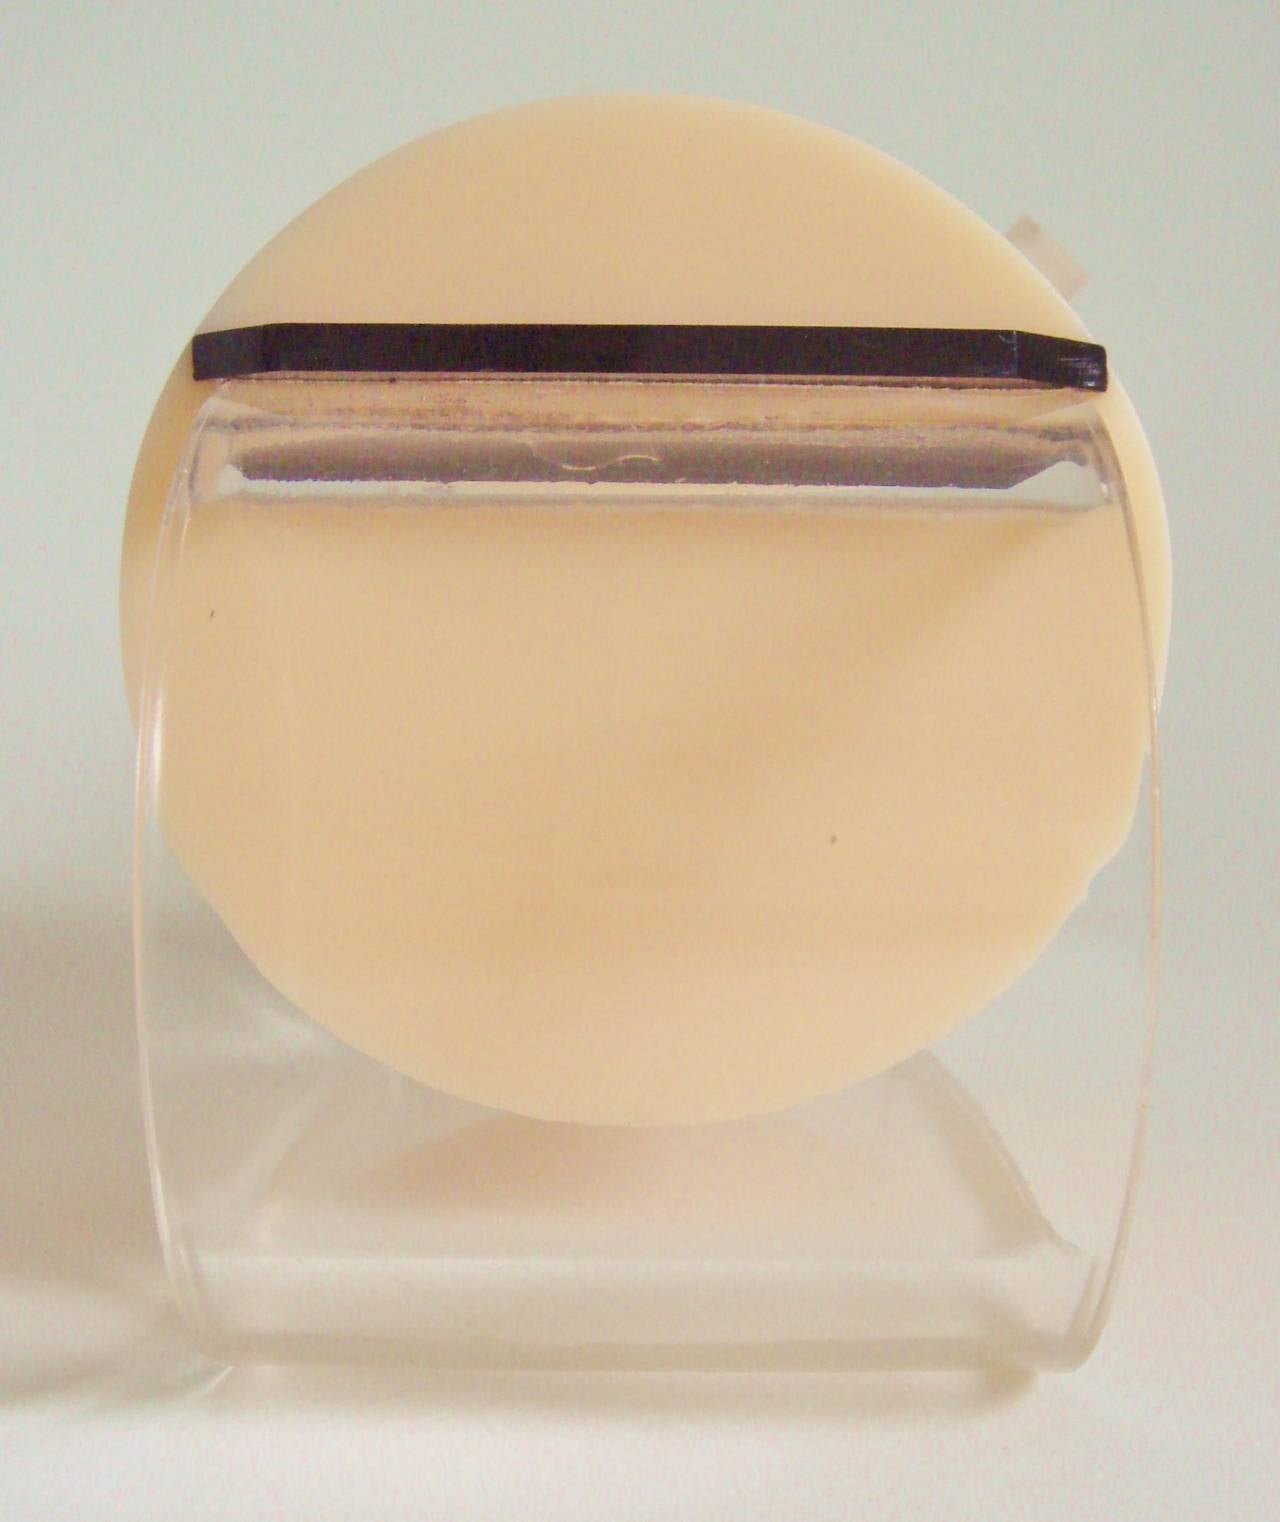 Molded Rare English Art Deco Vanity Box in Peach, Black and Clear Lucite For Sale